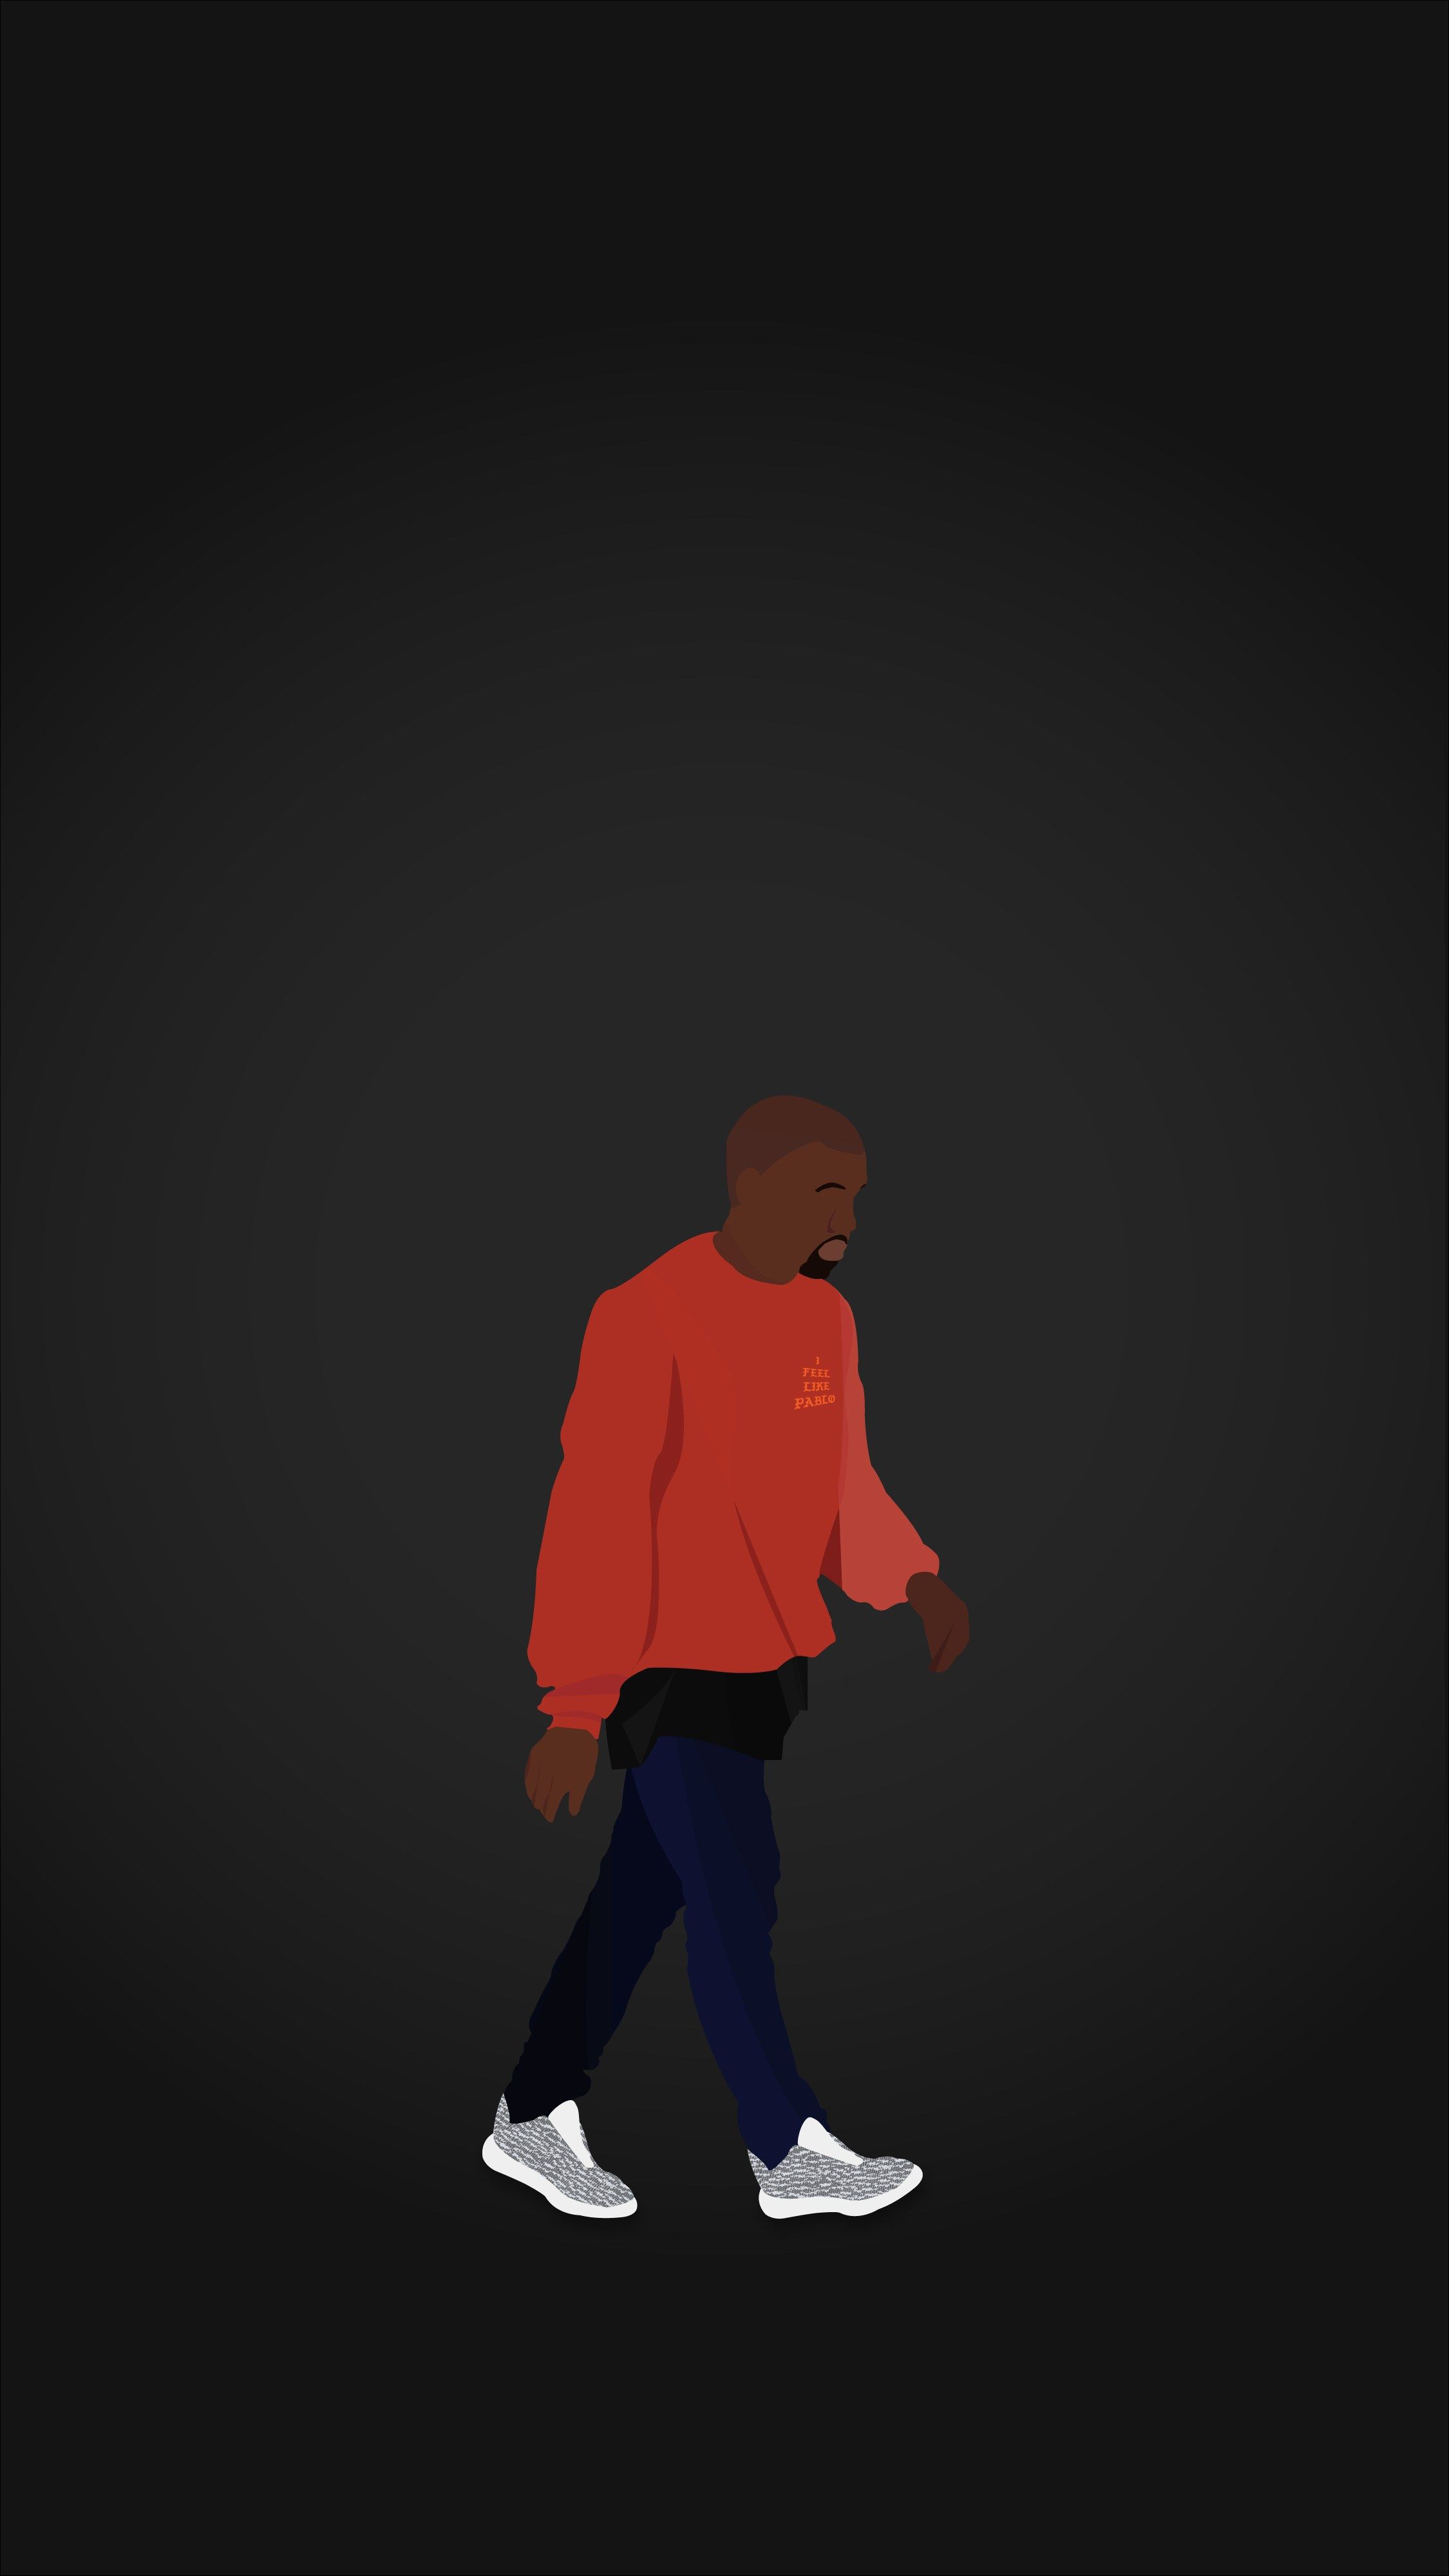 Yeezy hypebeast wallpaper by Oiboy123 - Download on ZEDGE™